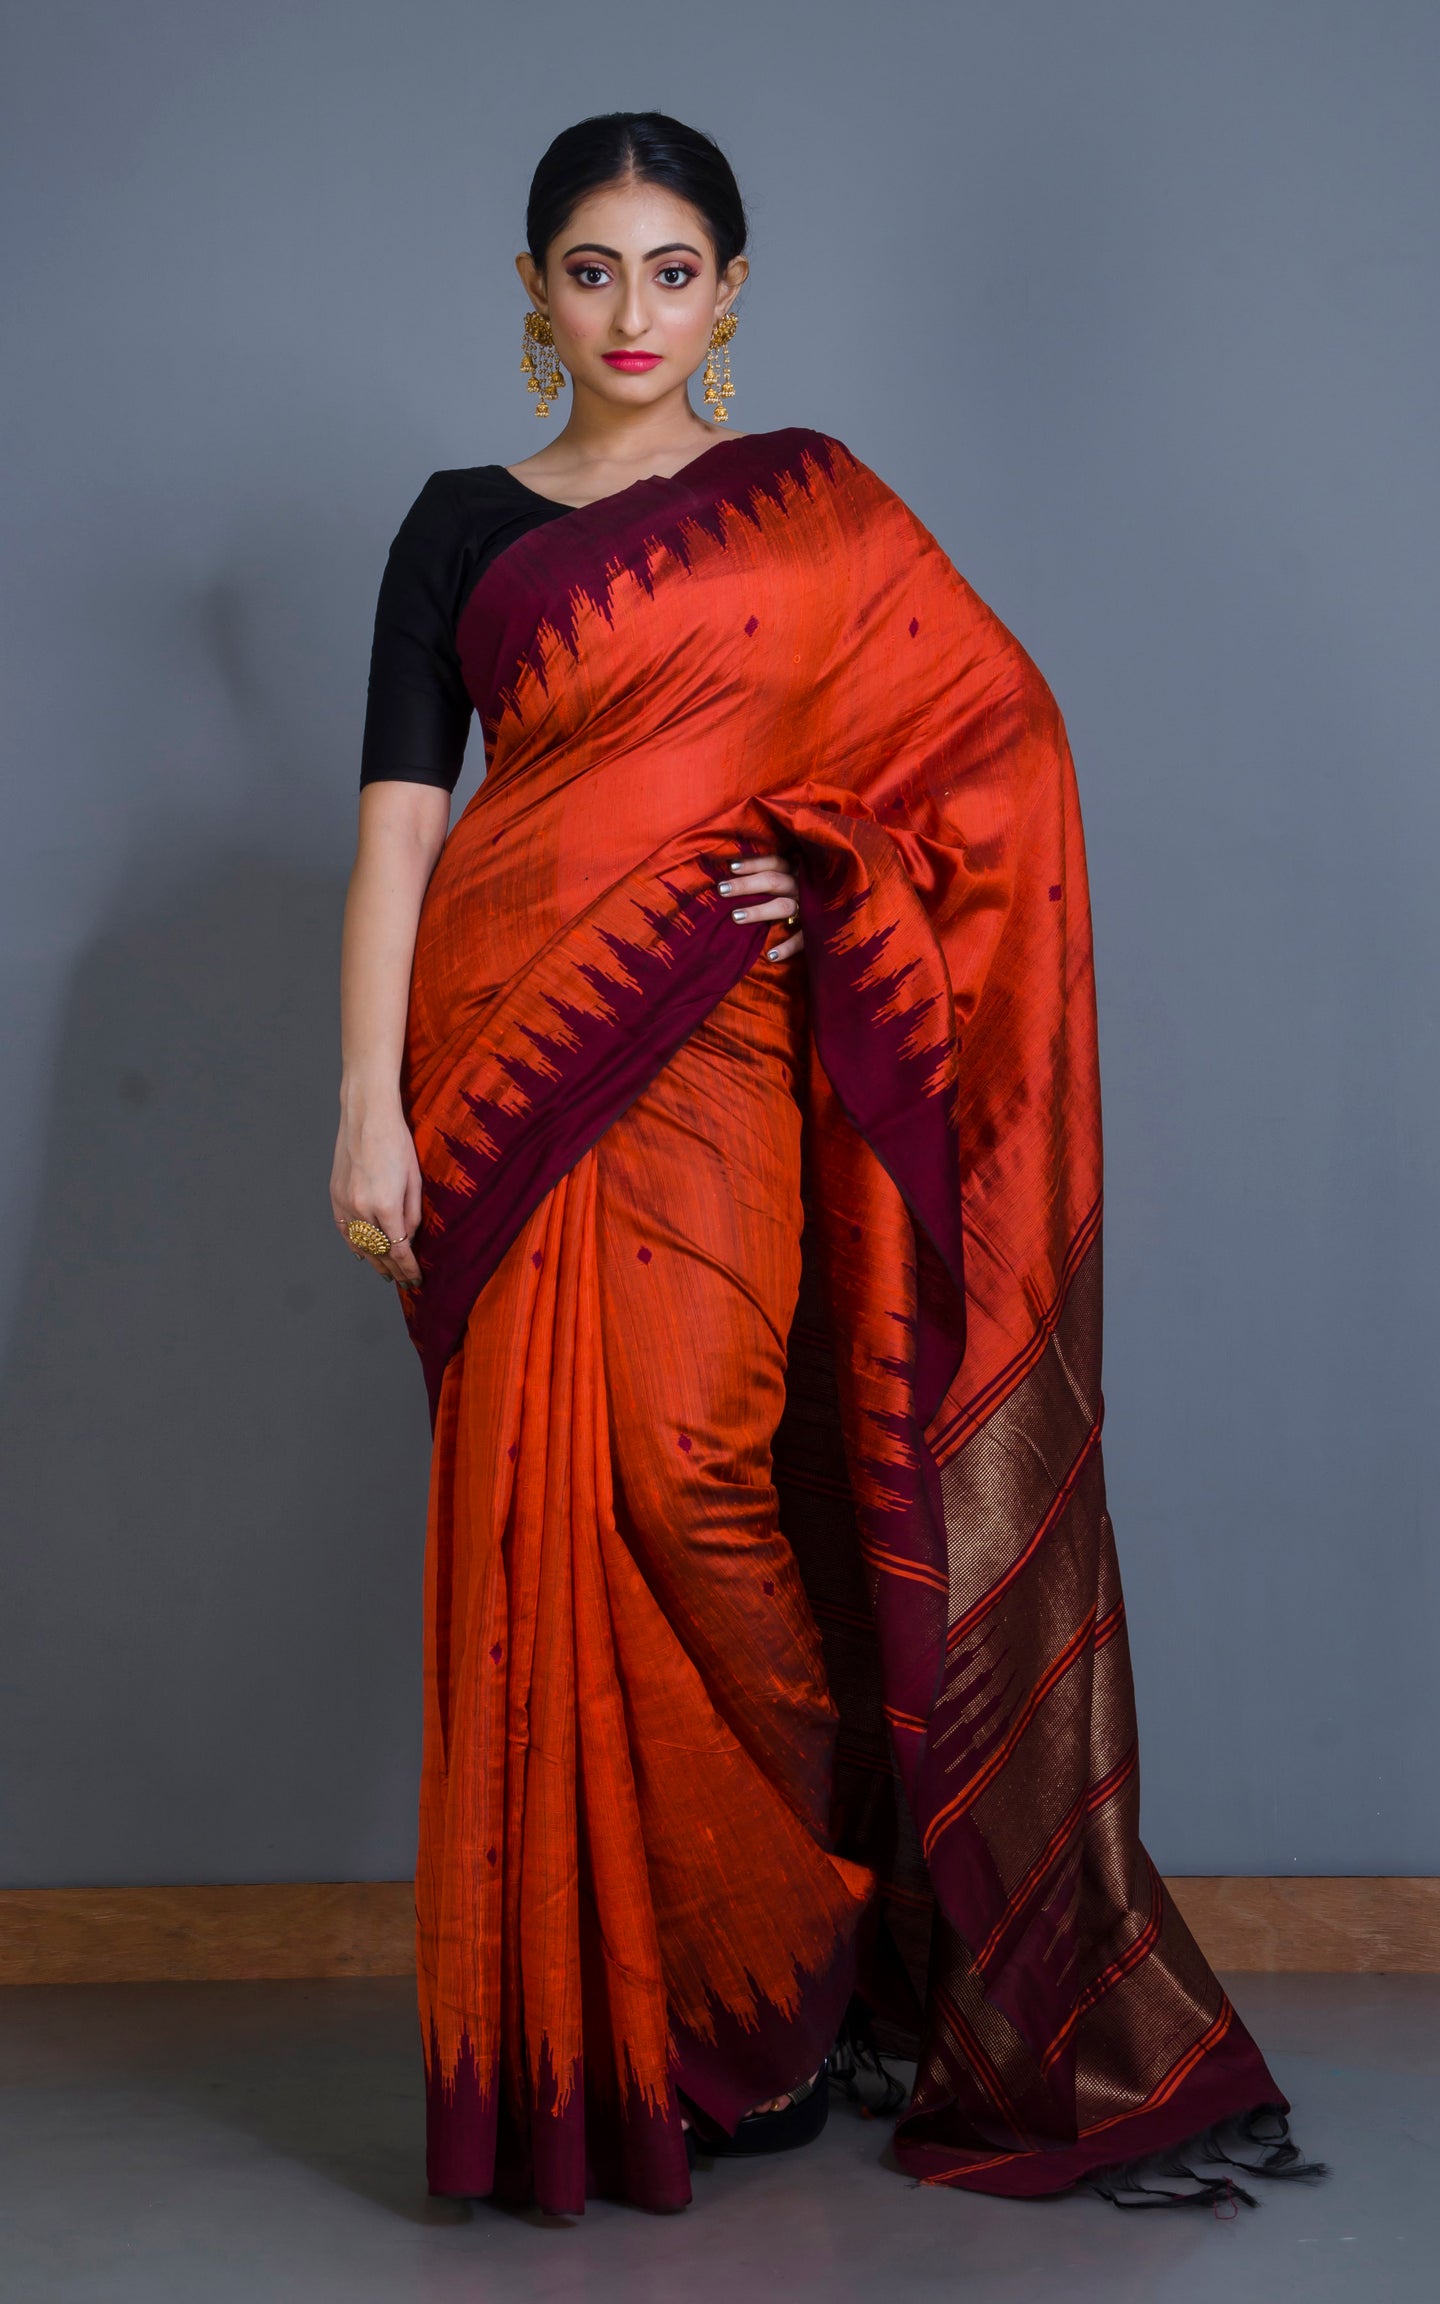 Handwoven Tussar Raw Silk Saree in Fire Orange and Maroon with Rich Pa –  BengalFAREWELL PARTY SAREE LOOK